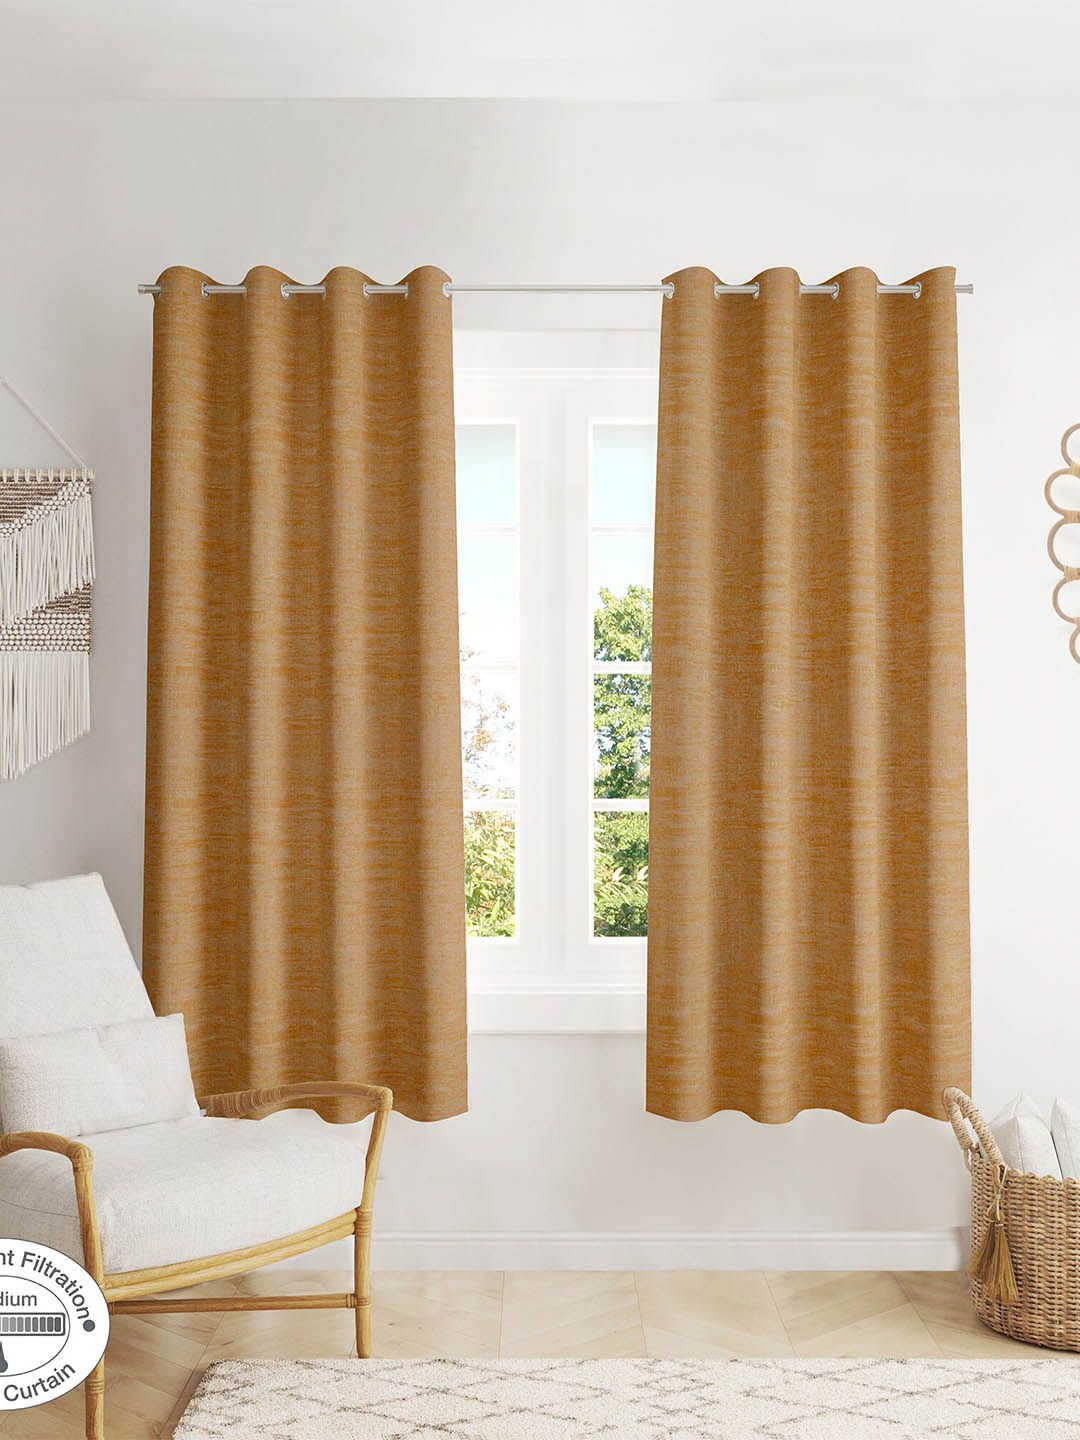 HomeTown Mustard Pack of 2 Window Curtain Price in India